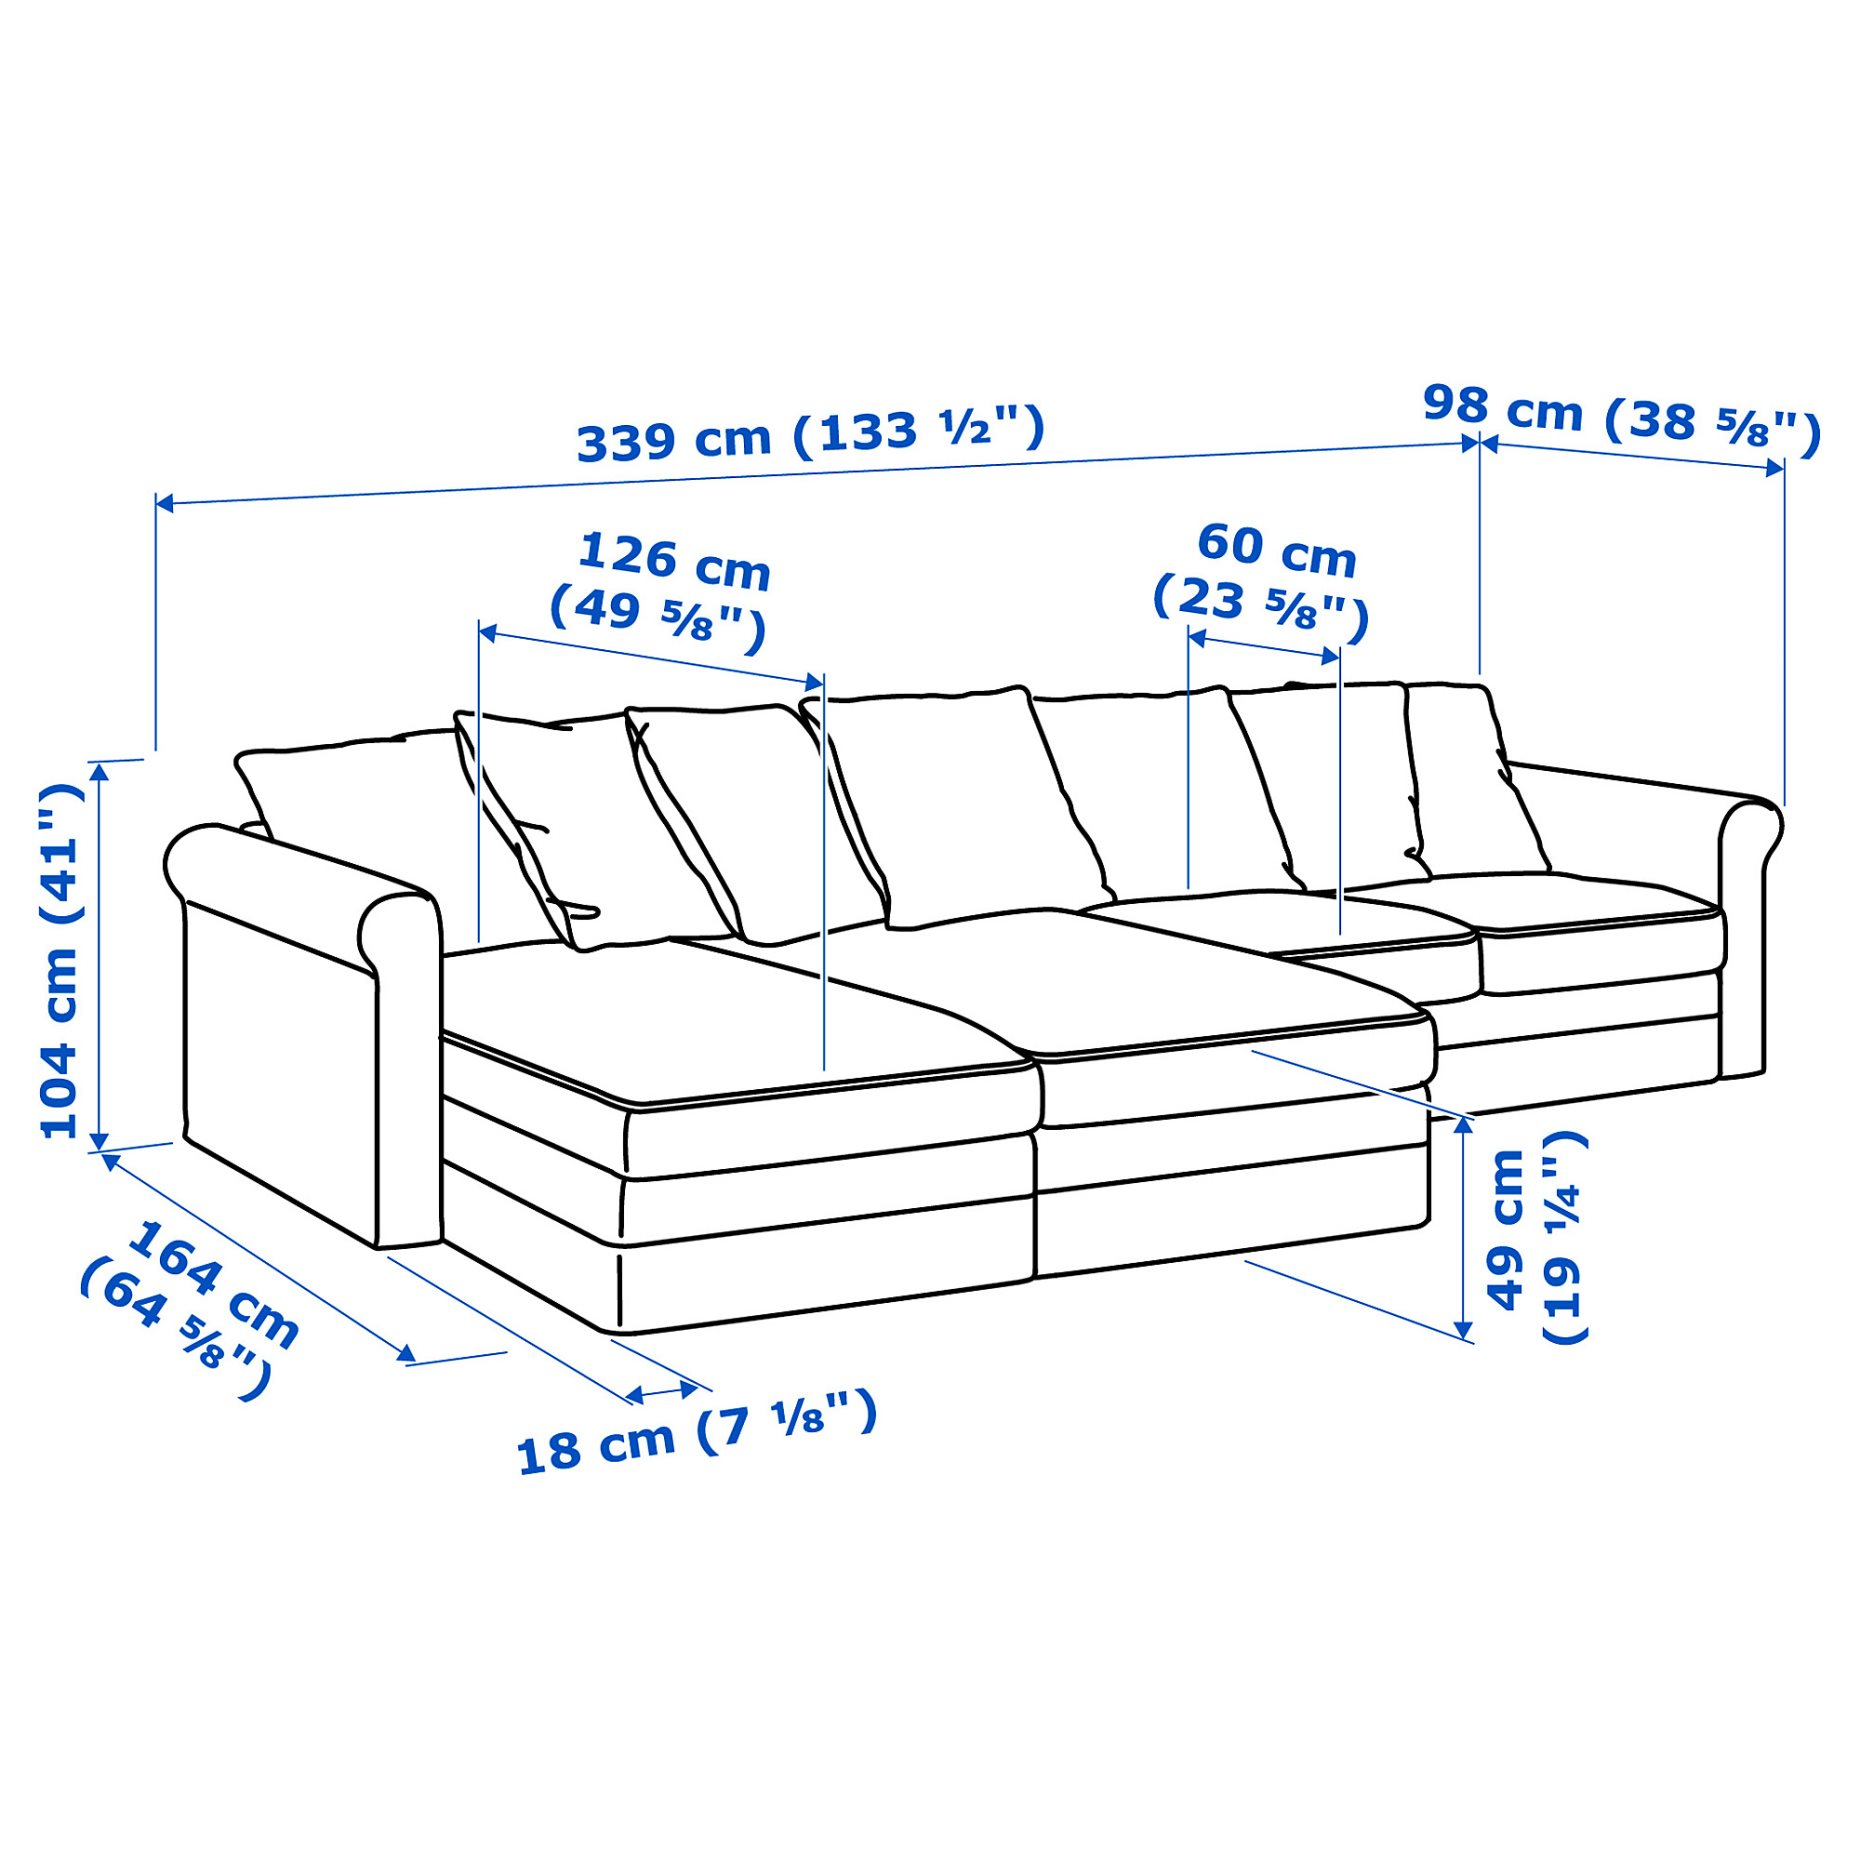 GRÖNLID, 4-seat sofa with chaise longues, 794.090.72